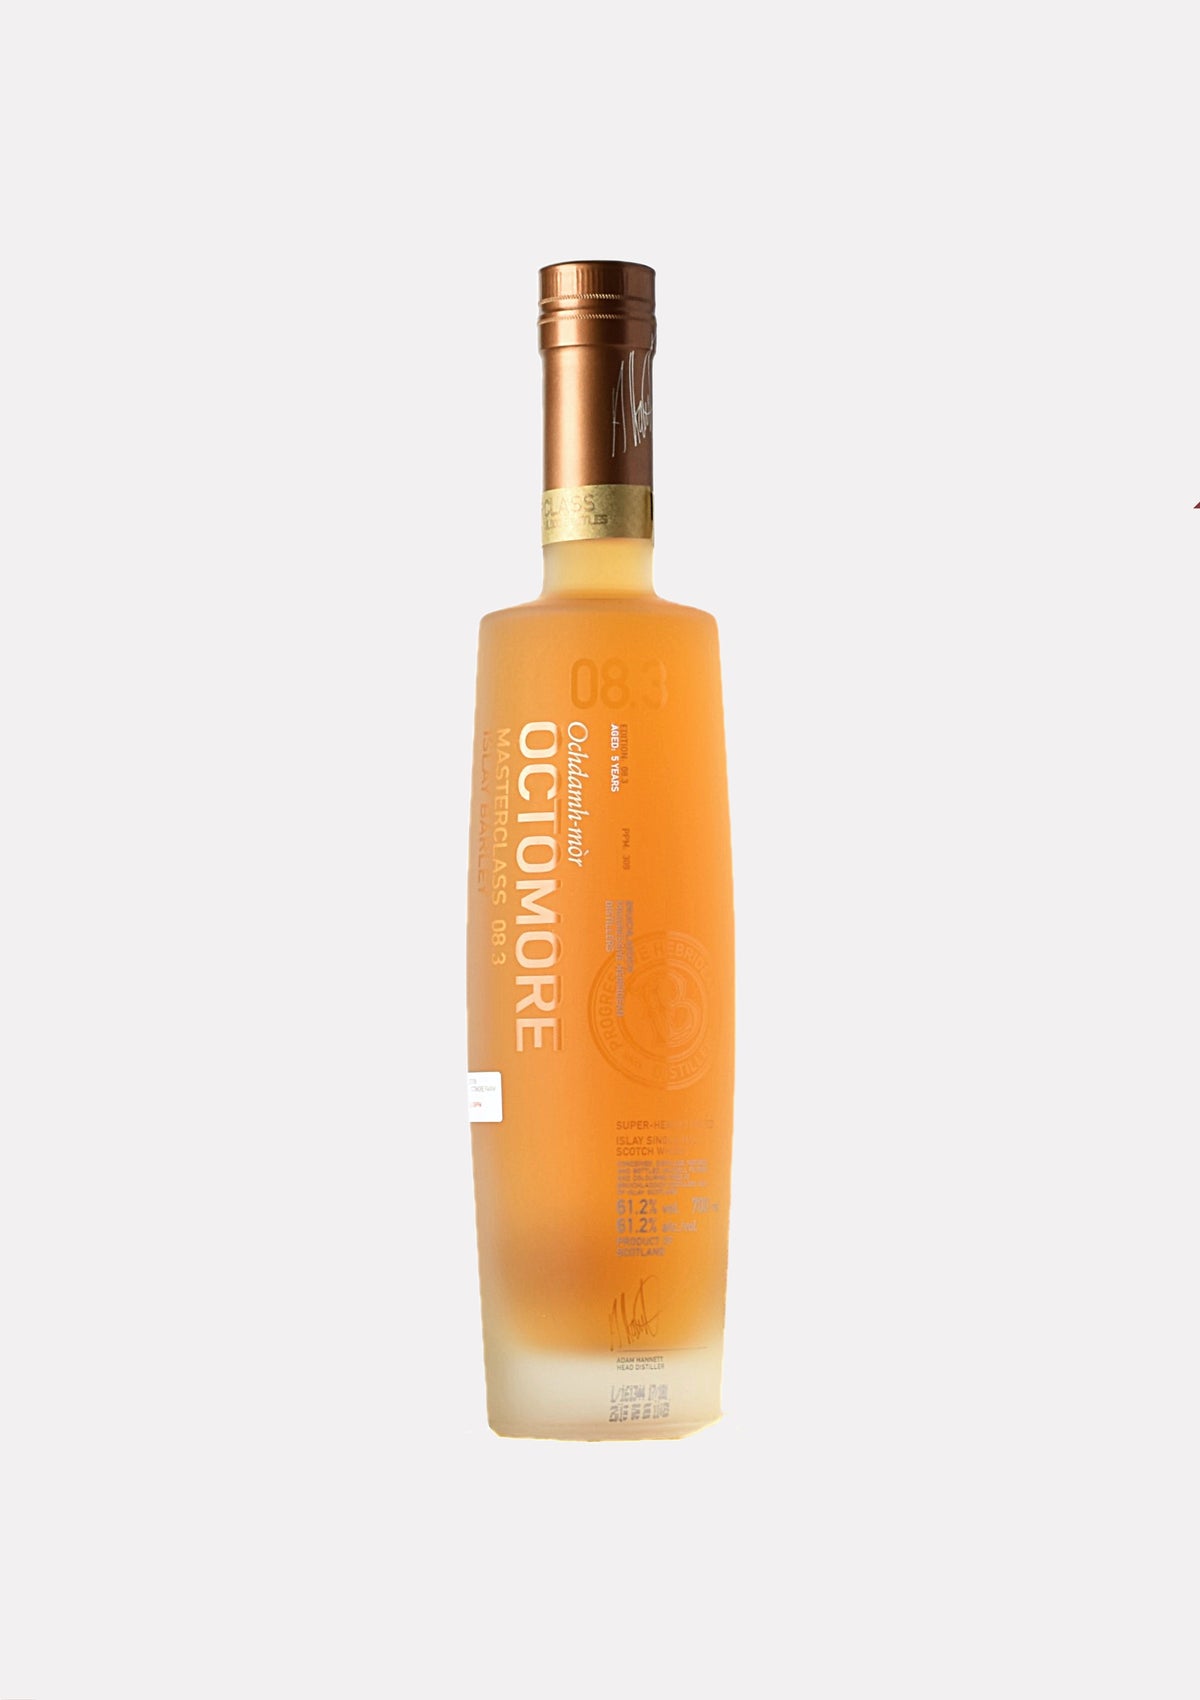 Octomore Masterclass 2011- 2017 5 Jahre 08.3 309 ppm